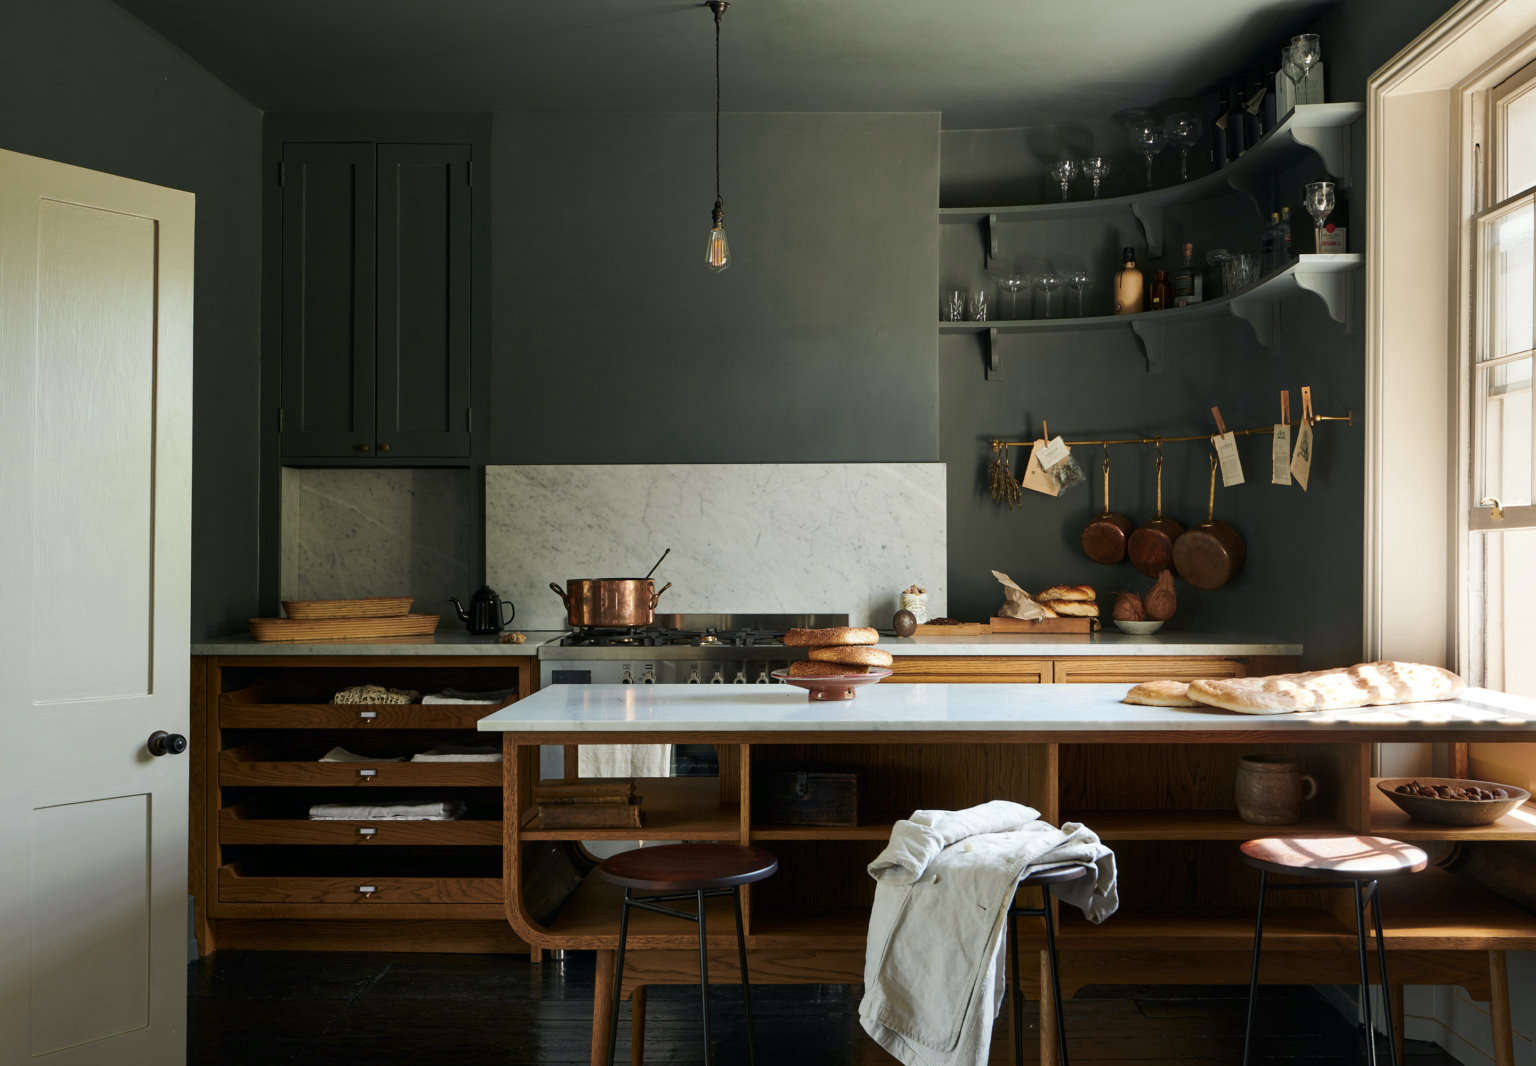 Kitchen of the Week A London Kitchen Inspired by Traditional Haberdashery Stores portrait 3